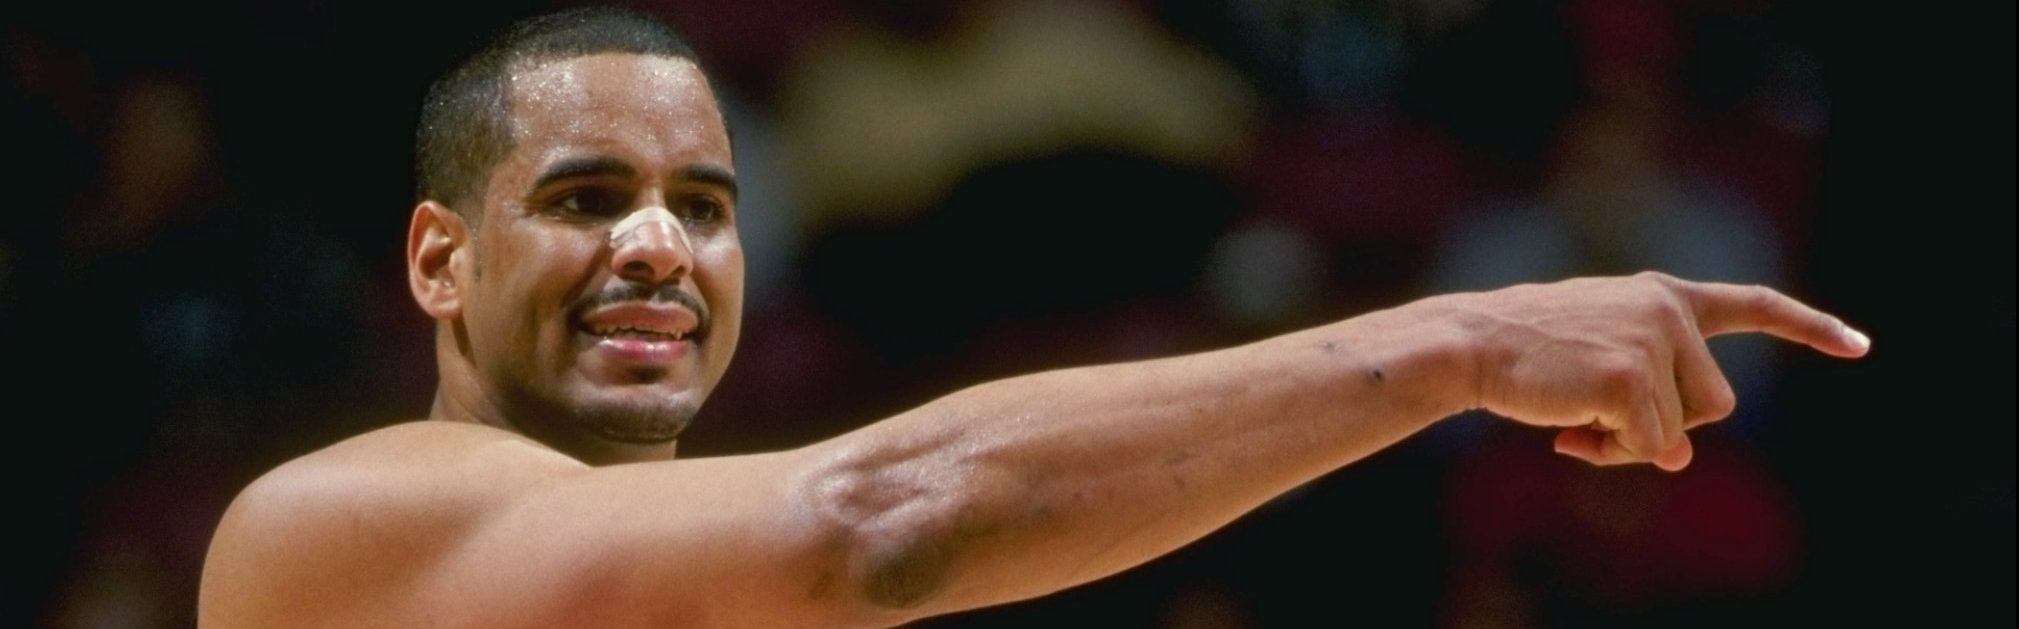 NBA's Jayson Williams dreams of rebounding from a dark past